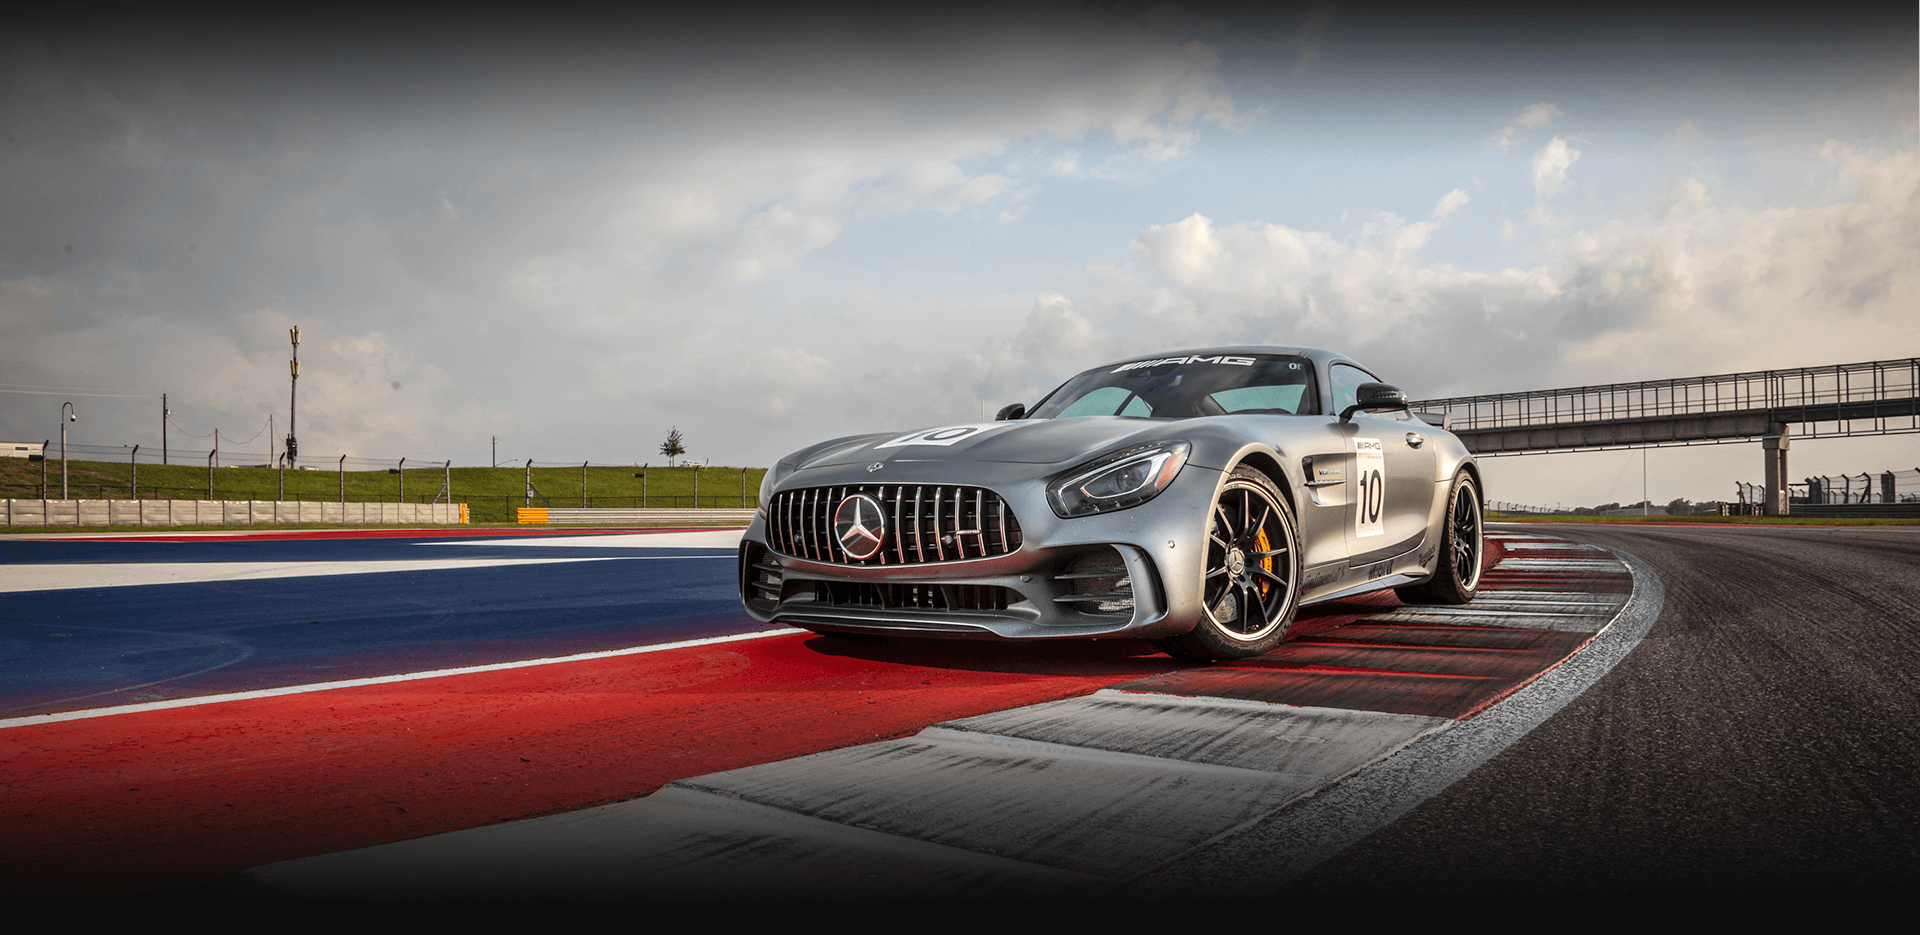 Gray Mercedes-AMG vehicle parked on rumble strip at Circuit of the Americas